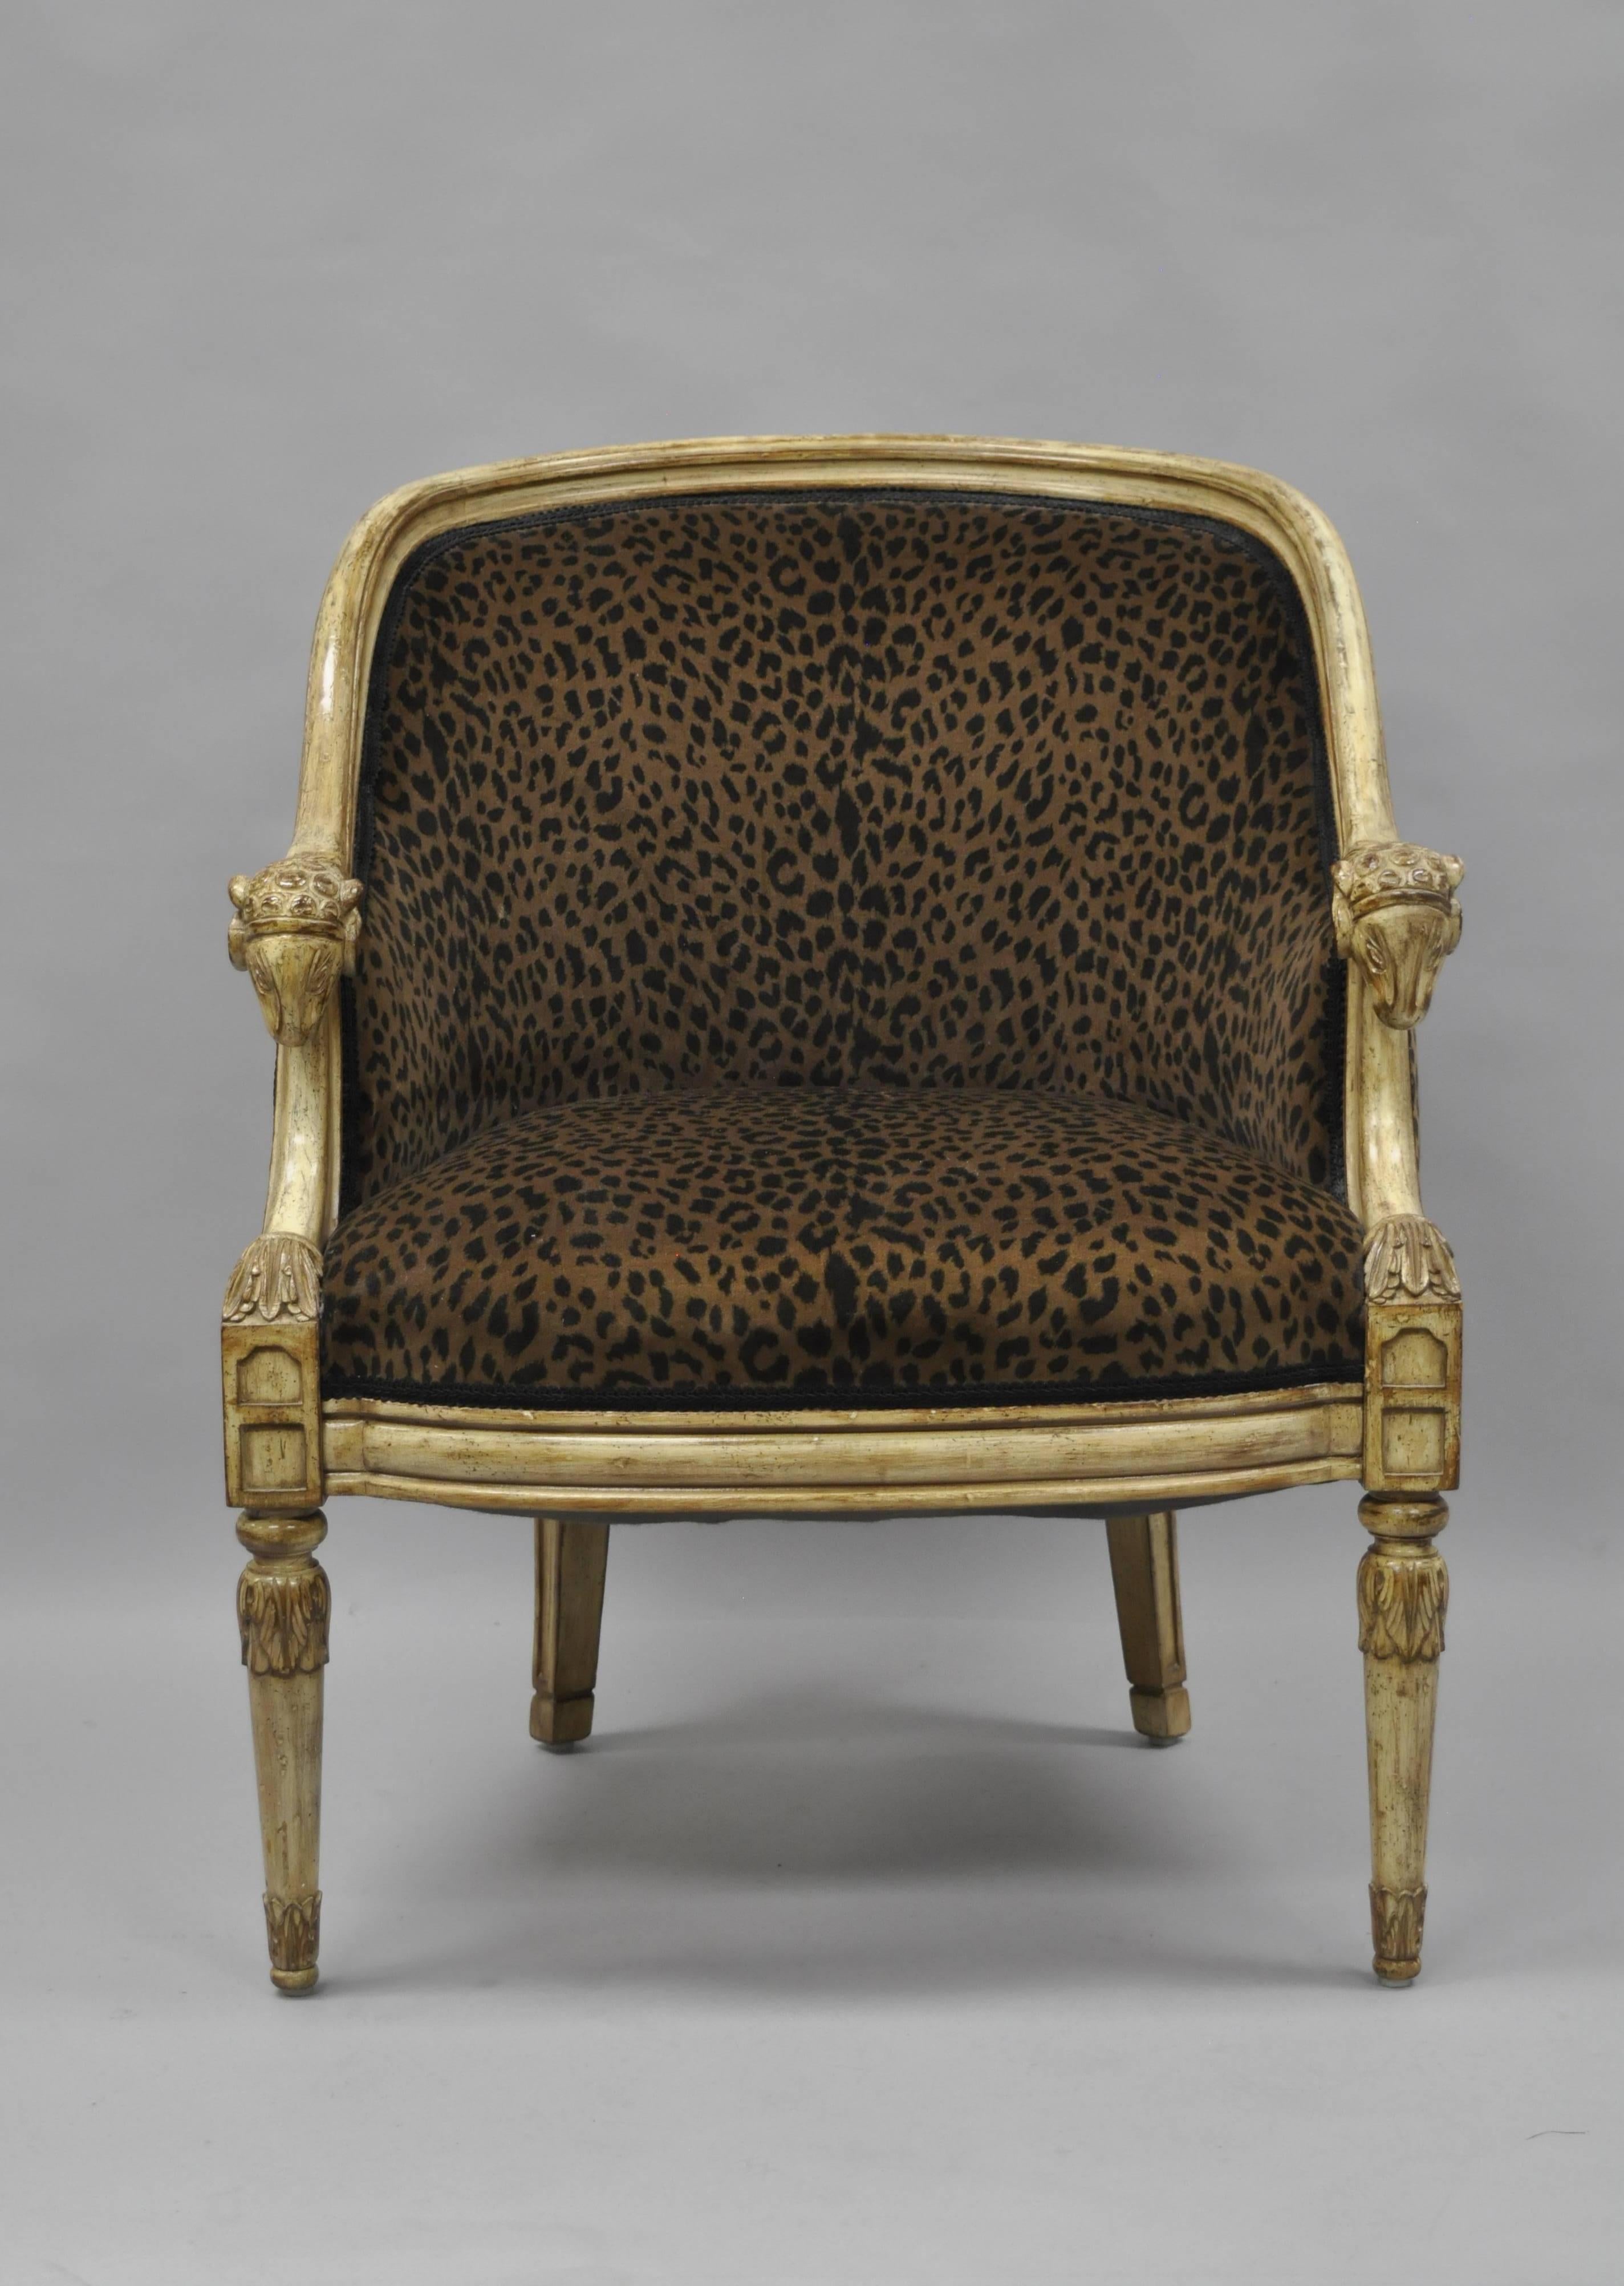 Late 20th century barrel back ram's head bergere chair with cheetah fabric in the neoclassical style. Item features a solid carved wood frame, cream distress painted finish, comfortable barrel form back, Ram's head armrests, tapered cabriole legs,